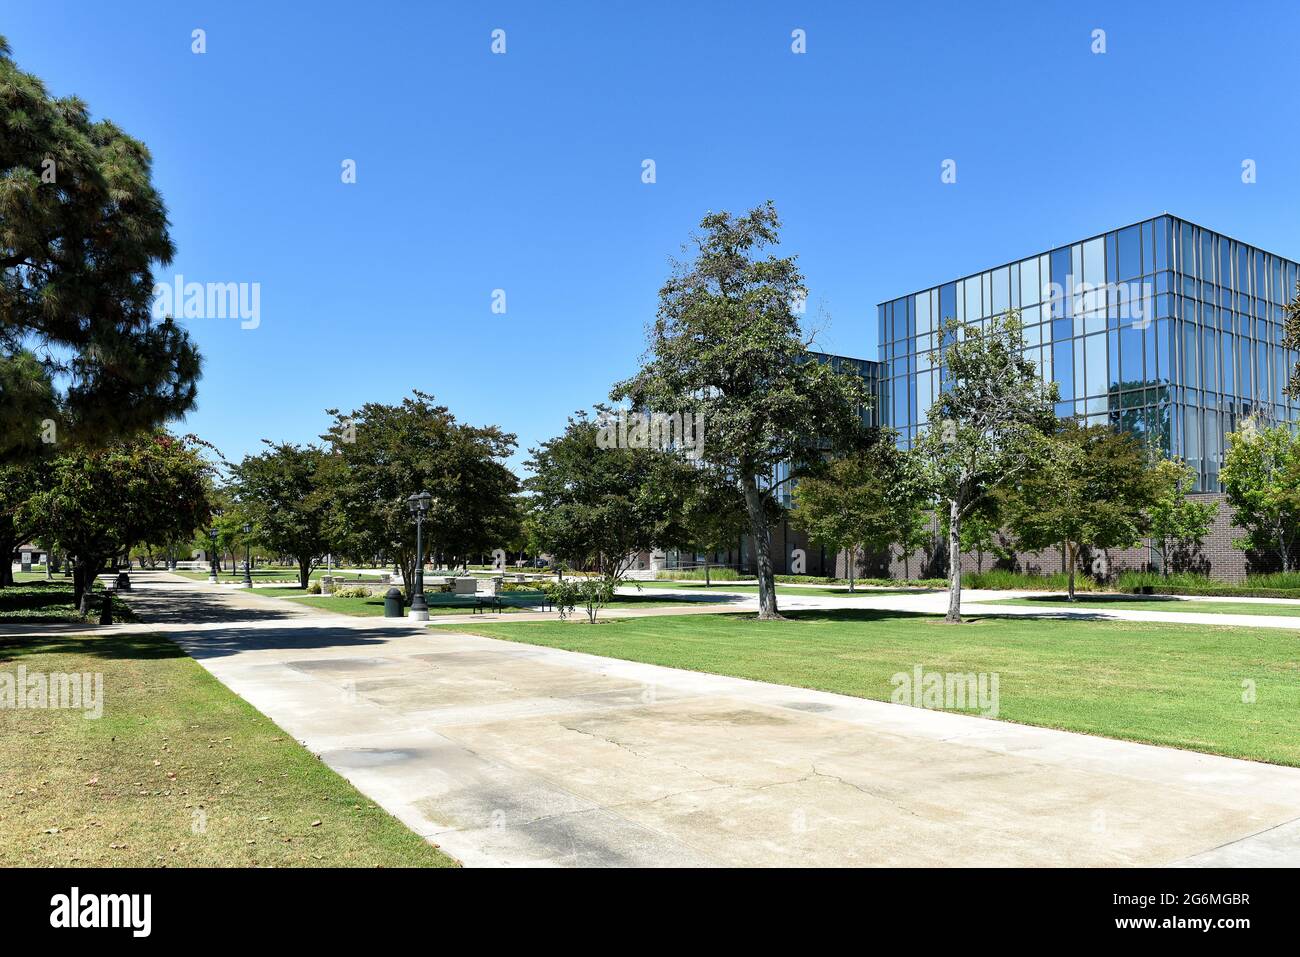 WESTMINSTER, CALIFORNIA - 5 JULY 2021: The Civic Center Commons, an urban oasis in the middle of the city government and services buildings. Stock Photo